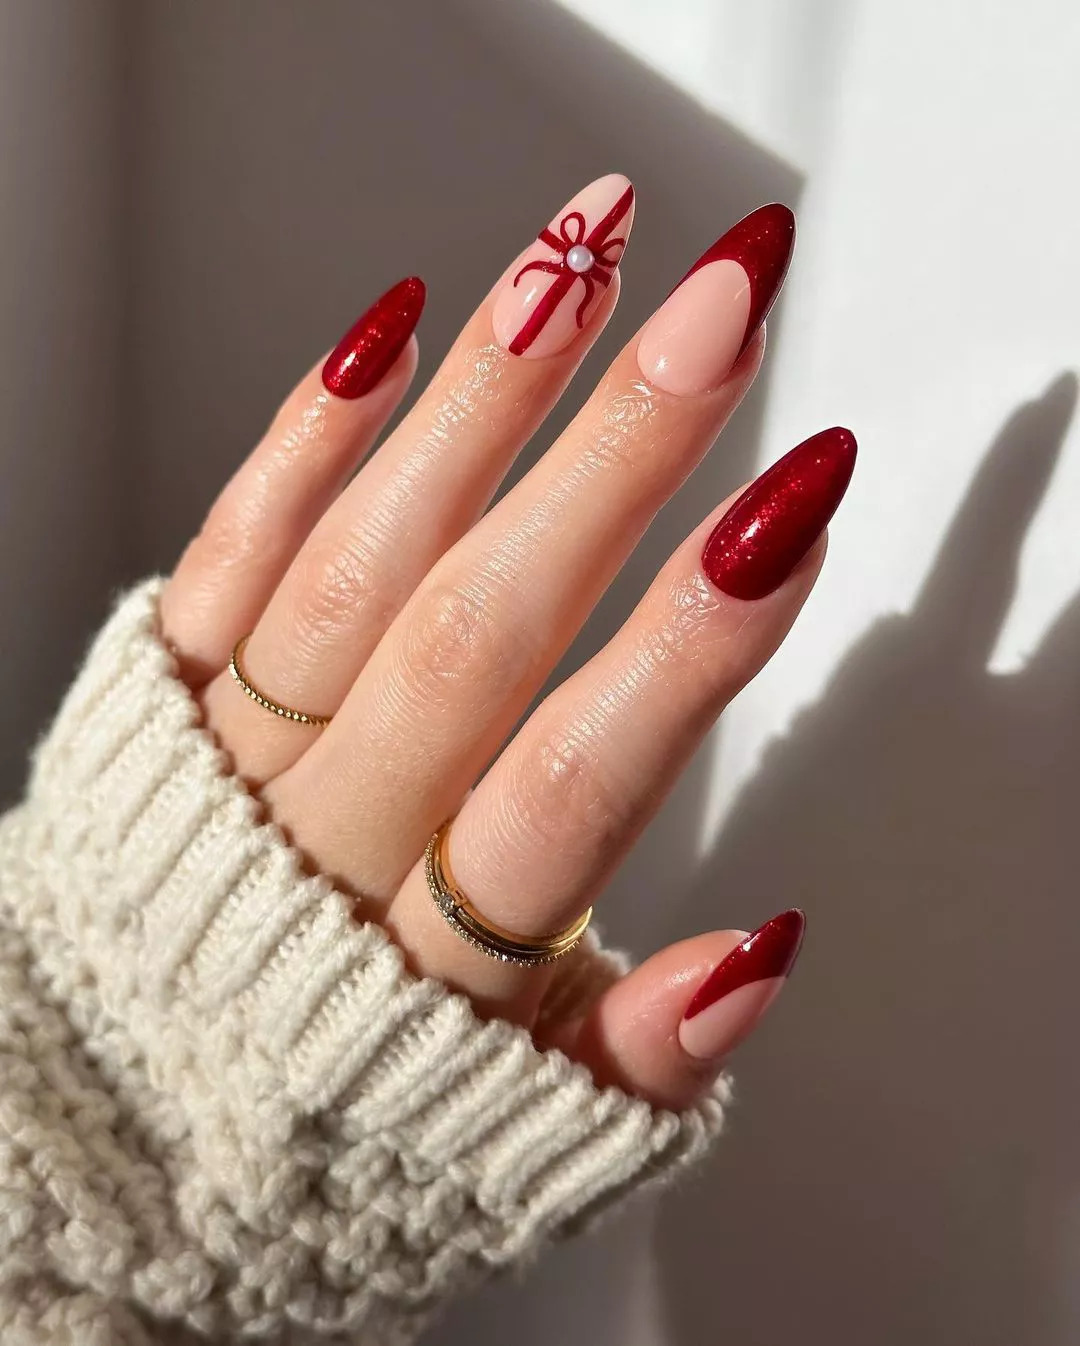 Simple Christmas Nails With A Bow